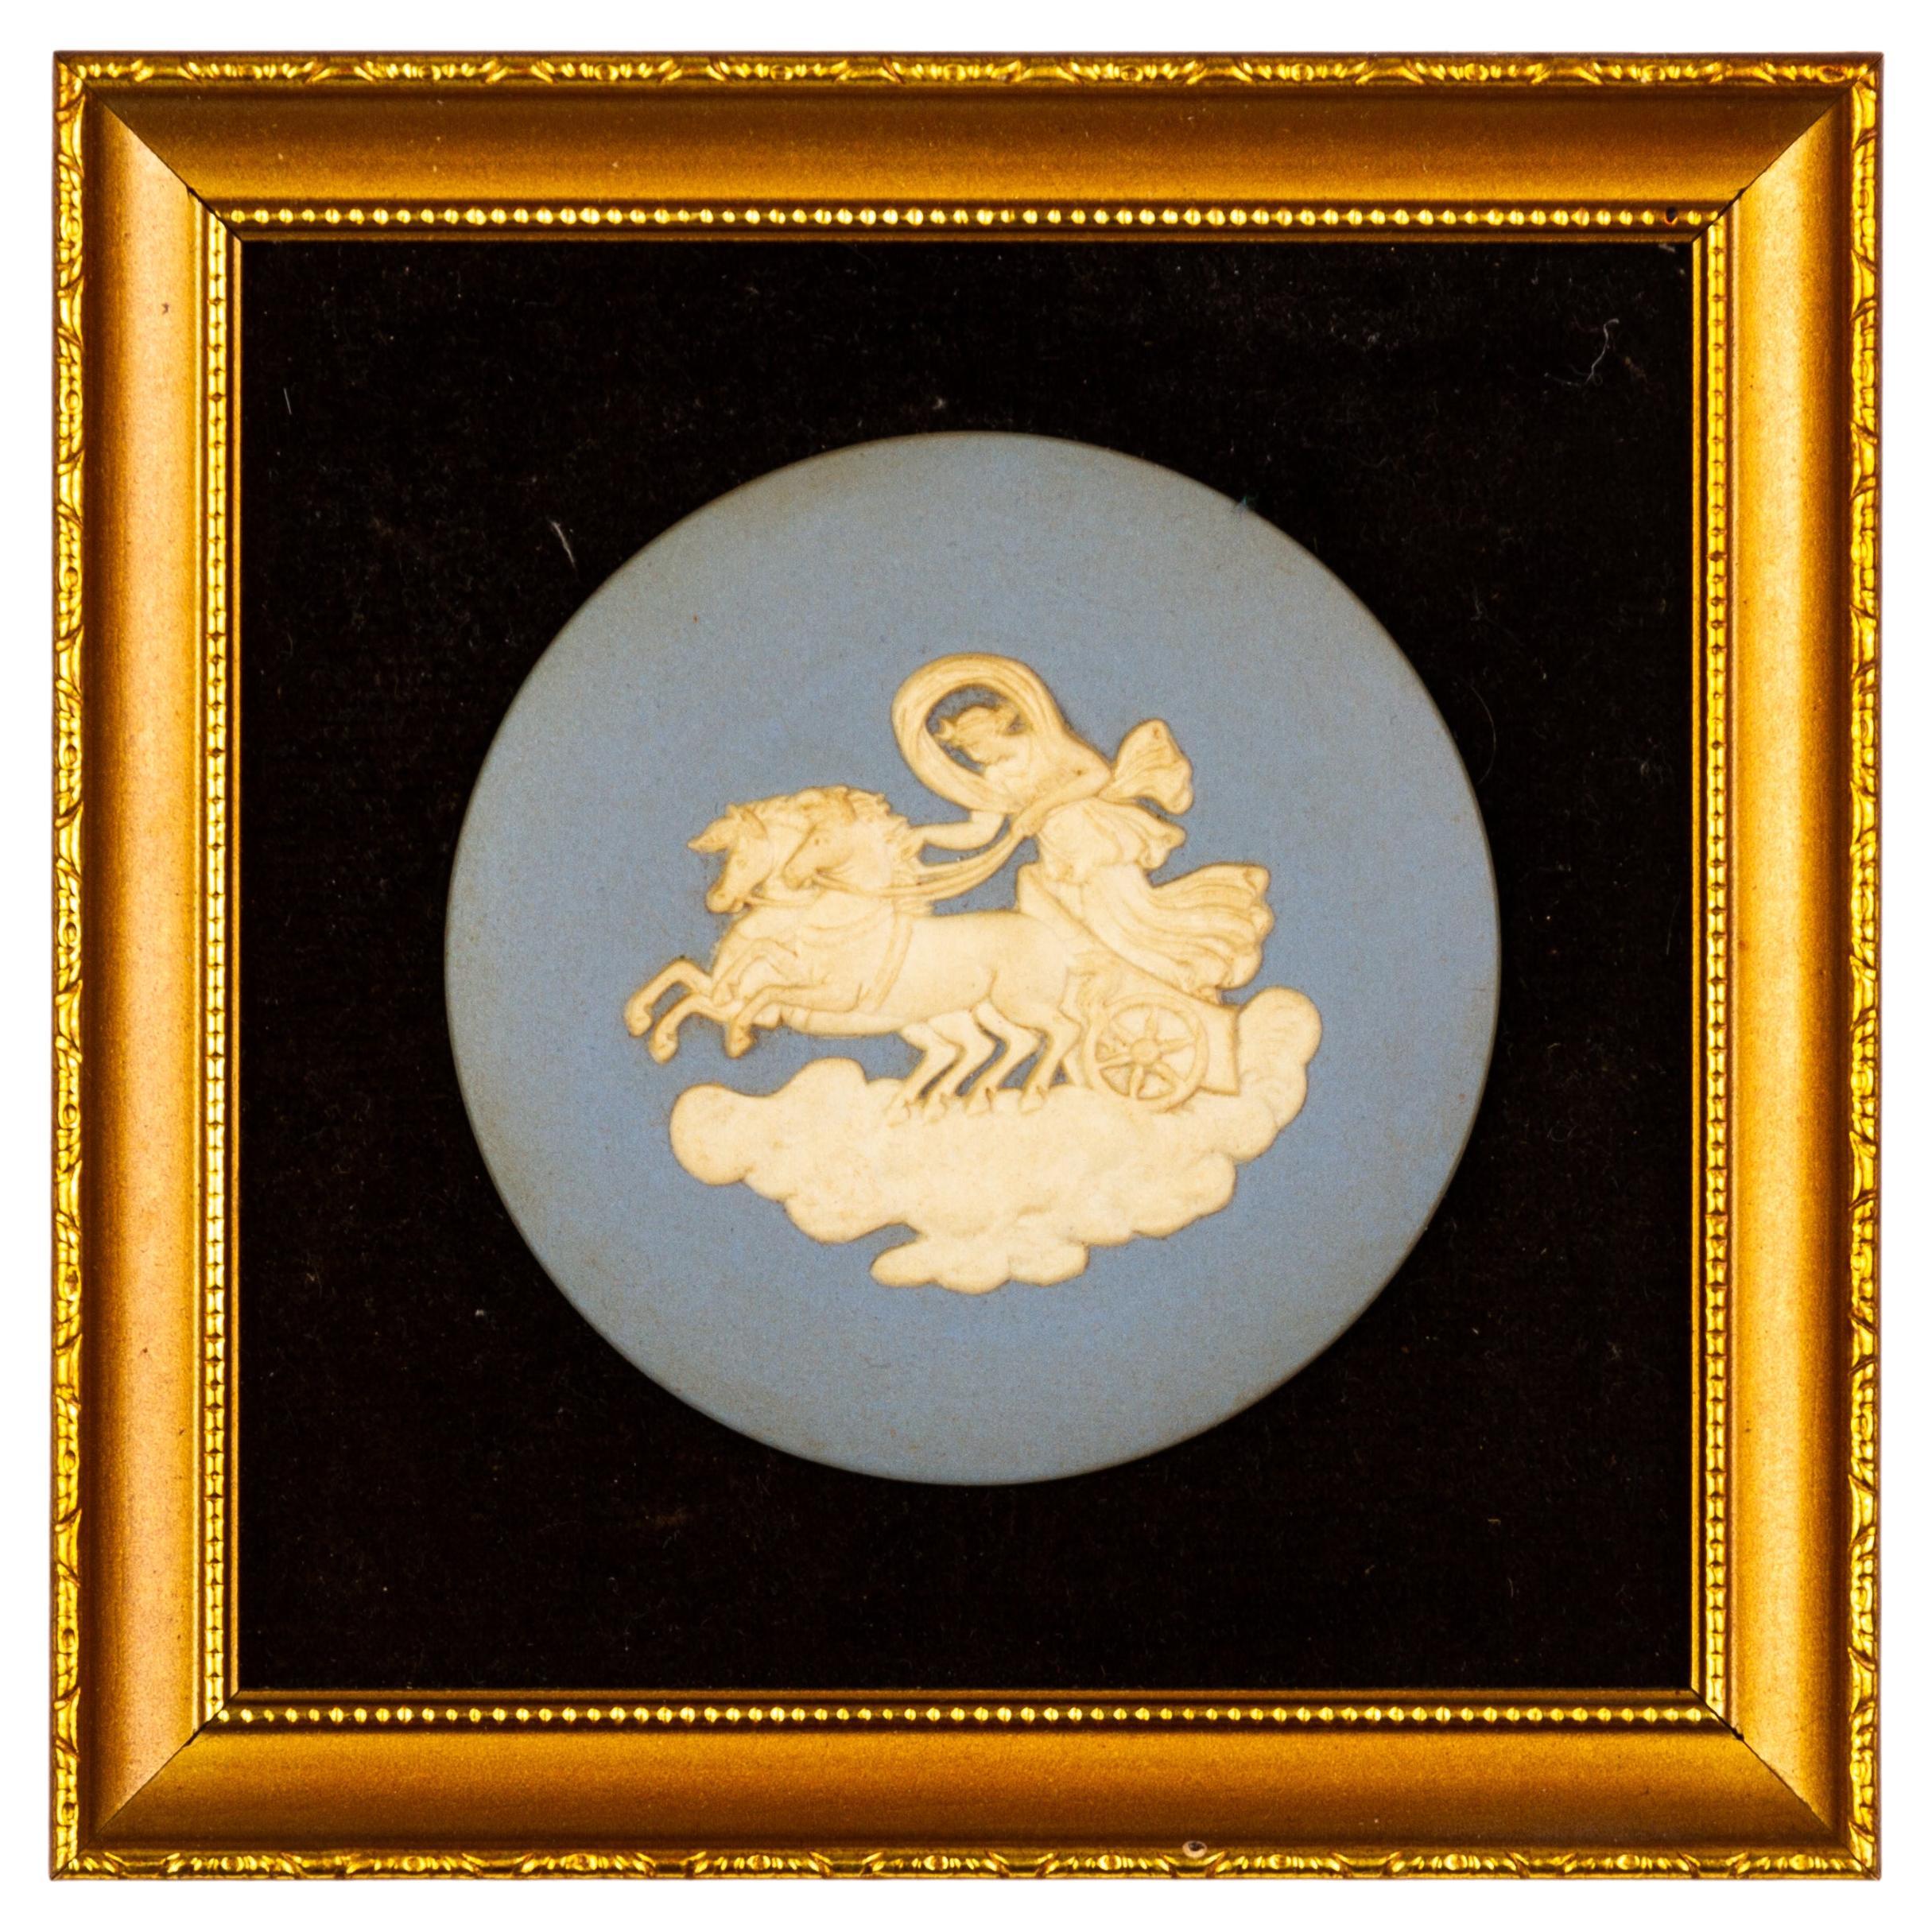 Wedgwood Blue Jasperware Neoclassical Chariot Wall Plaque For Sale